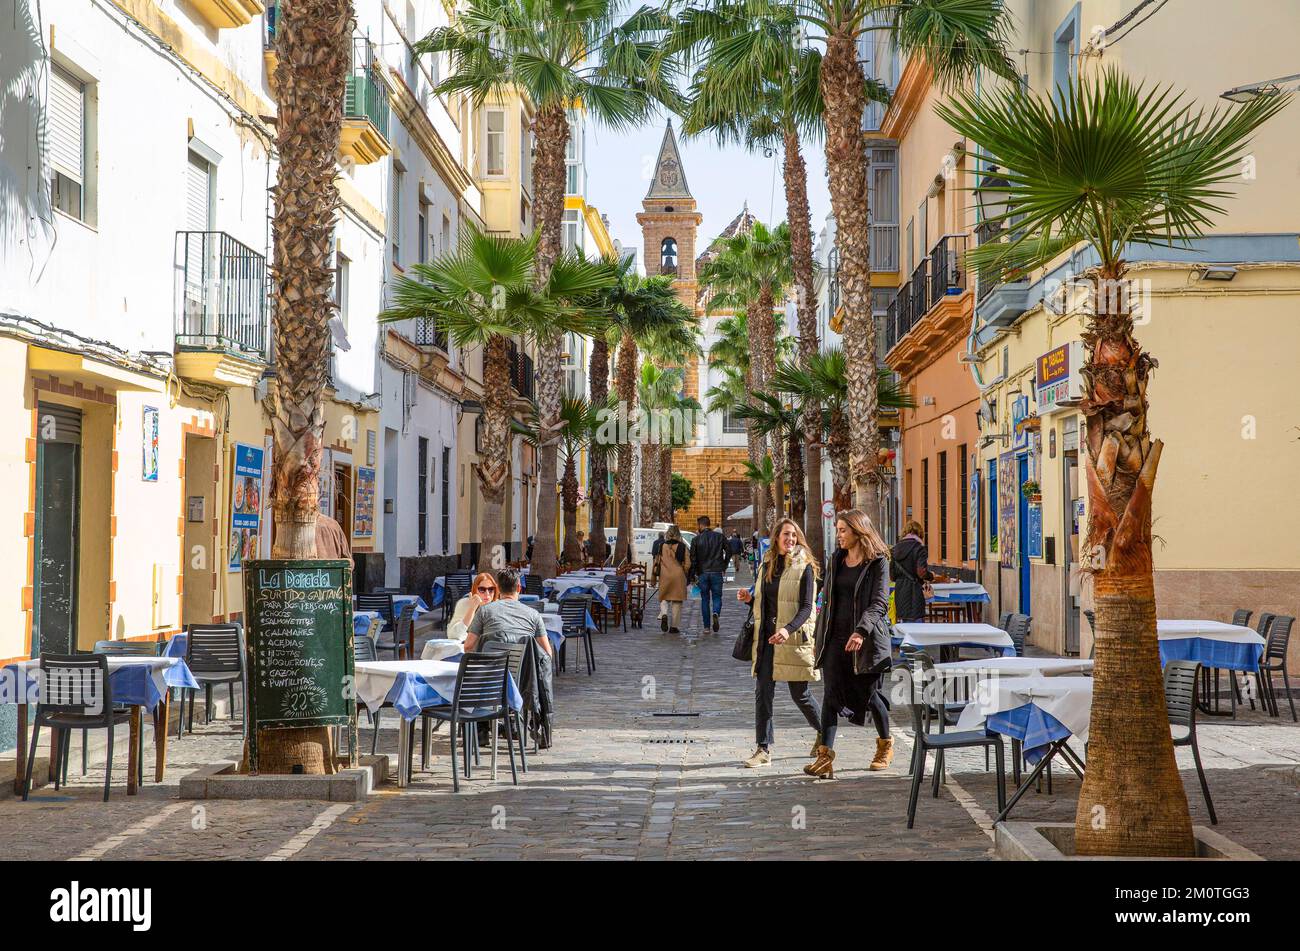 Spain, Andalusia, Cadiz, La Vi?a district, women walking in a pedestrian street lined with restaurant terraces and palm trees Stock Photo